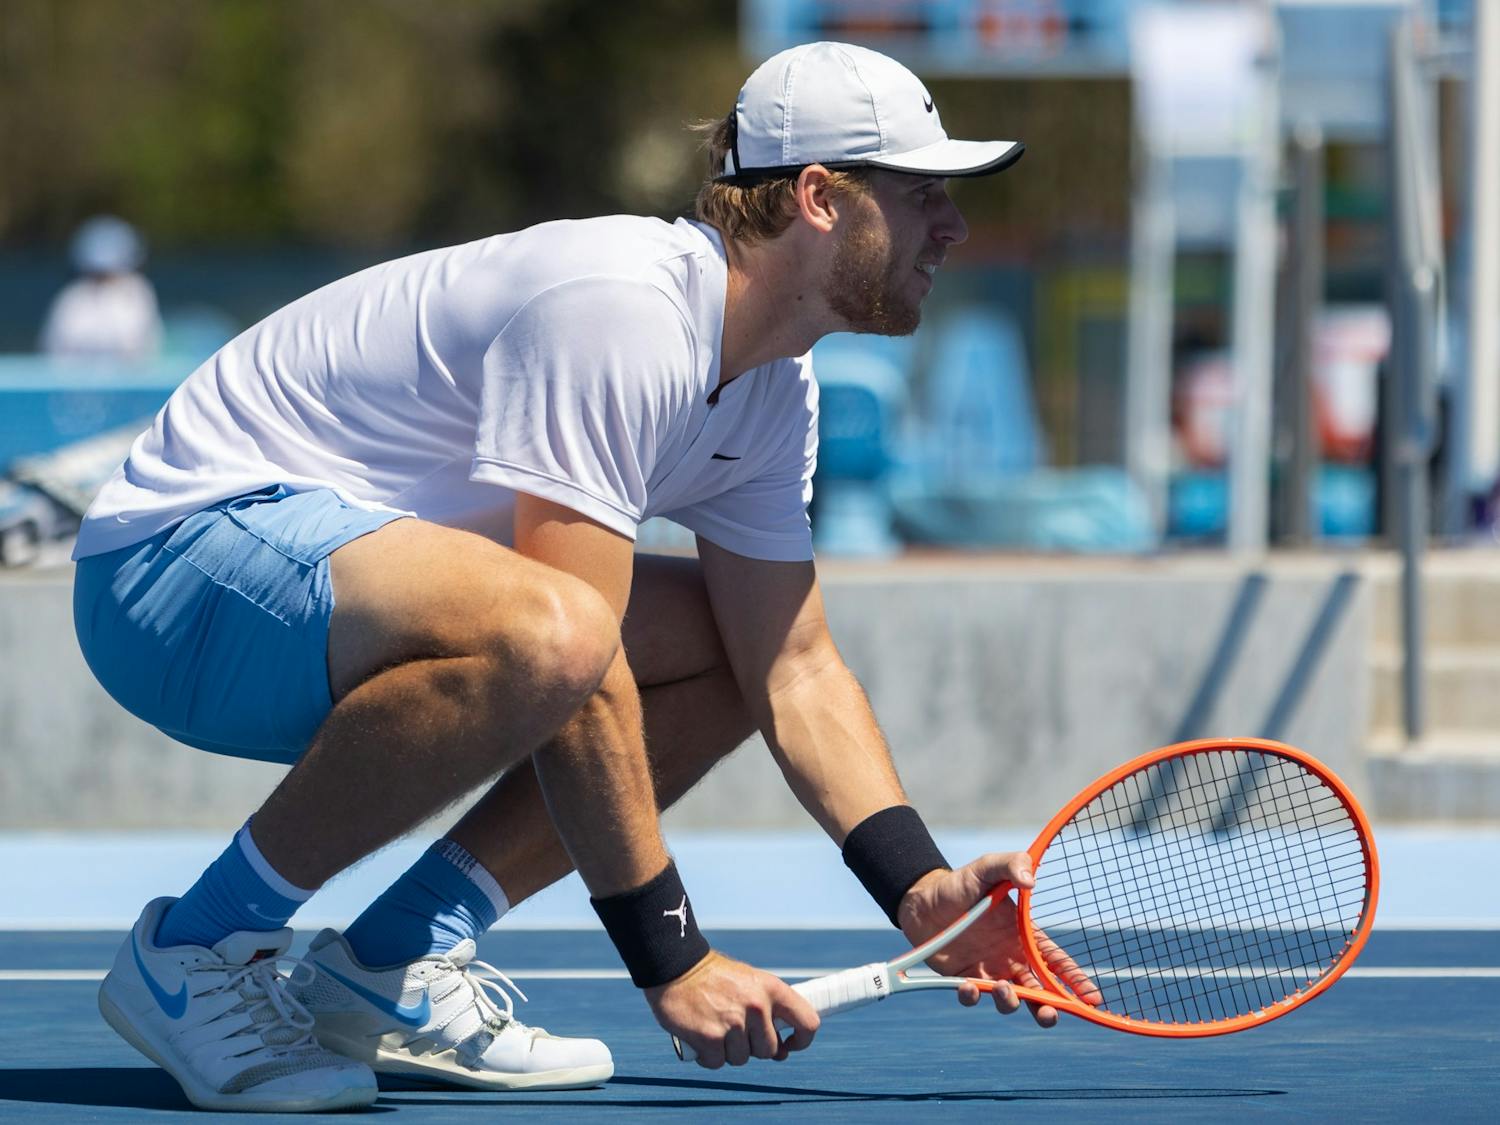 UNC graduate student Ryan Seggerman waits for doubles partner, Casey Kania, to serve during the mens’ tennis match against Wake Forrest at the newly opened Cone-Kenfield Tennis Center in Chapel Hill on Sunday, April 2, 2023. UNC beat Wake Forest 4-3.